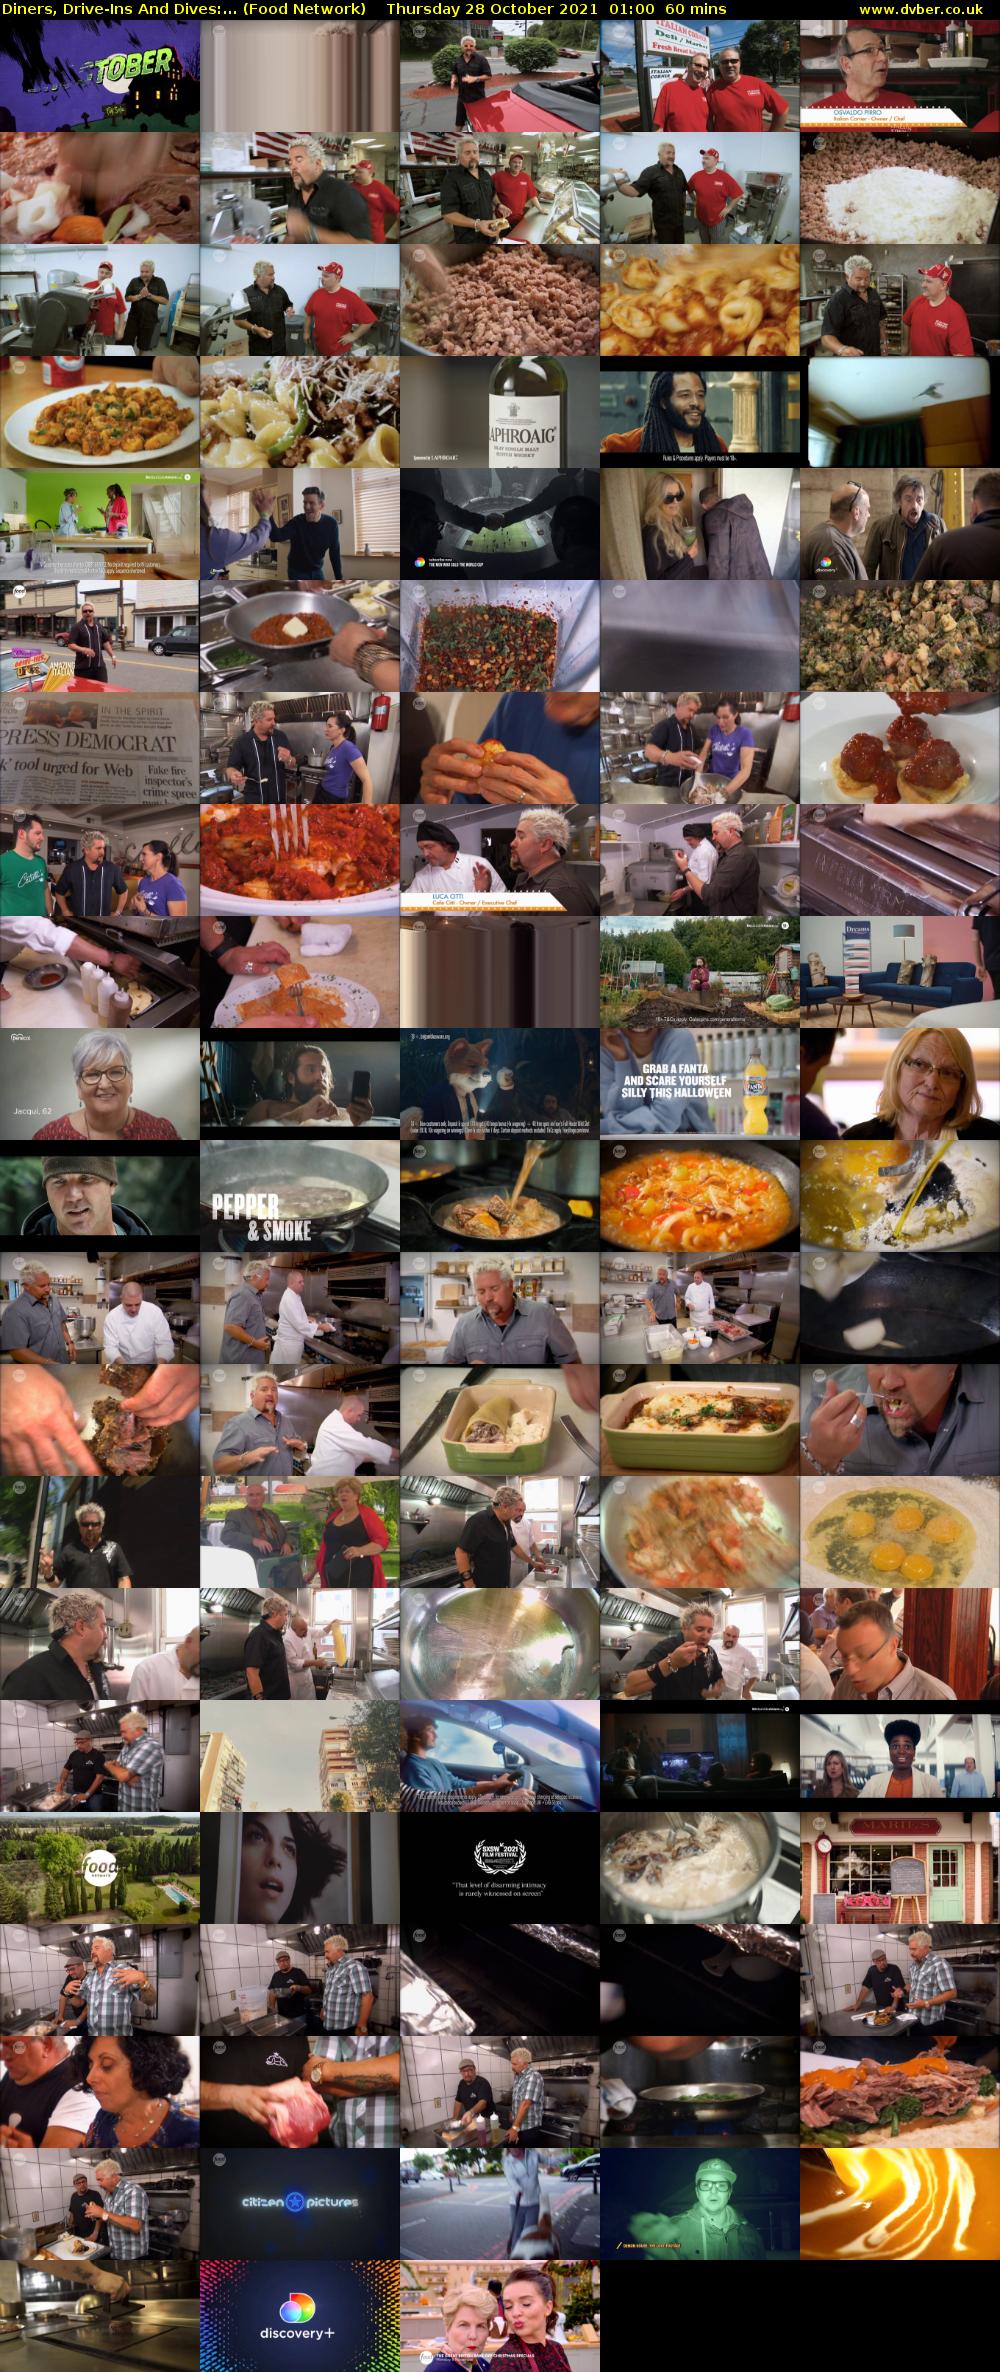 Diners, Drive-Ins And Dives:... (Food Network) Thursday 28 October 2021 01:00 - 02:00